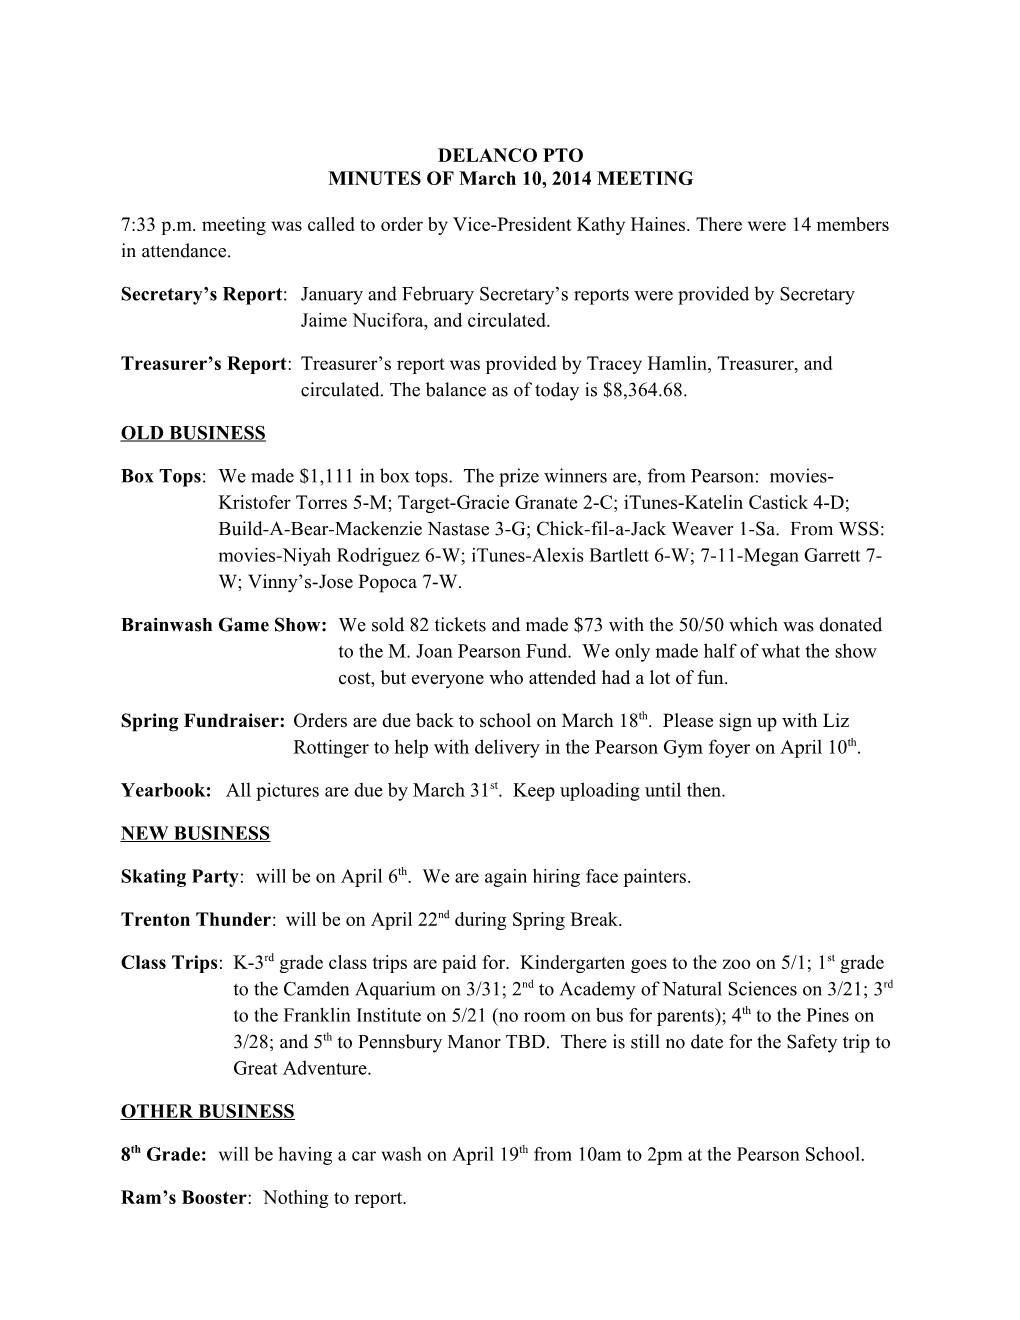 MINUTES of March 10, 2014 MEETING